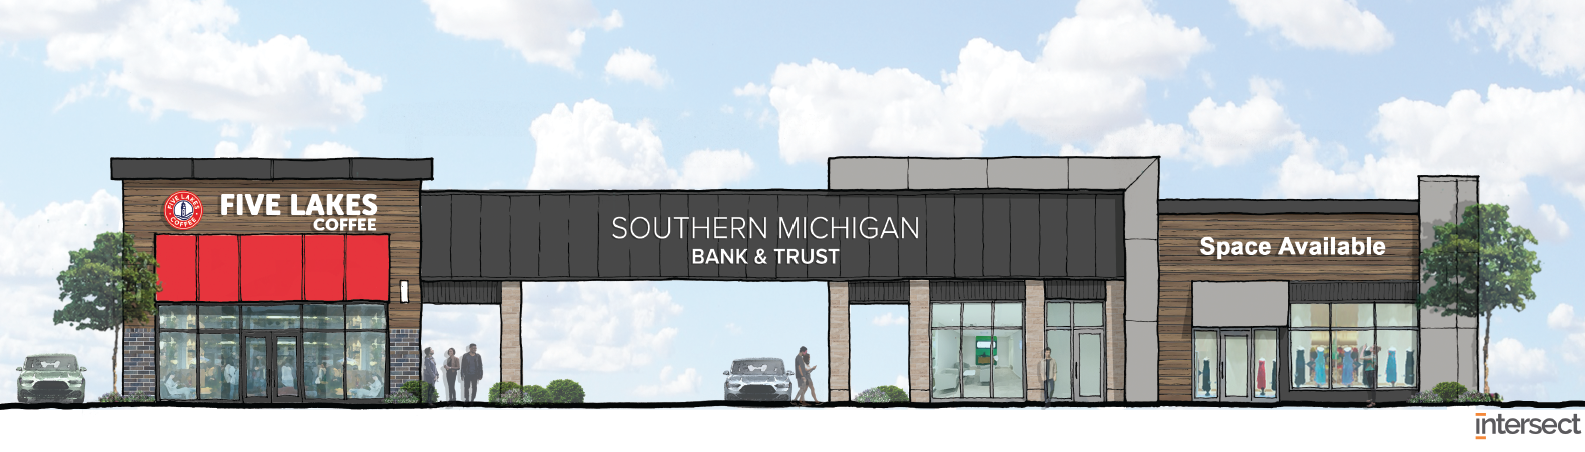 Coming soon to Sturgis Michigan! Drive-thru Branch connected to Five Lakes Coffee